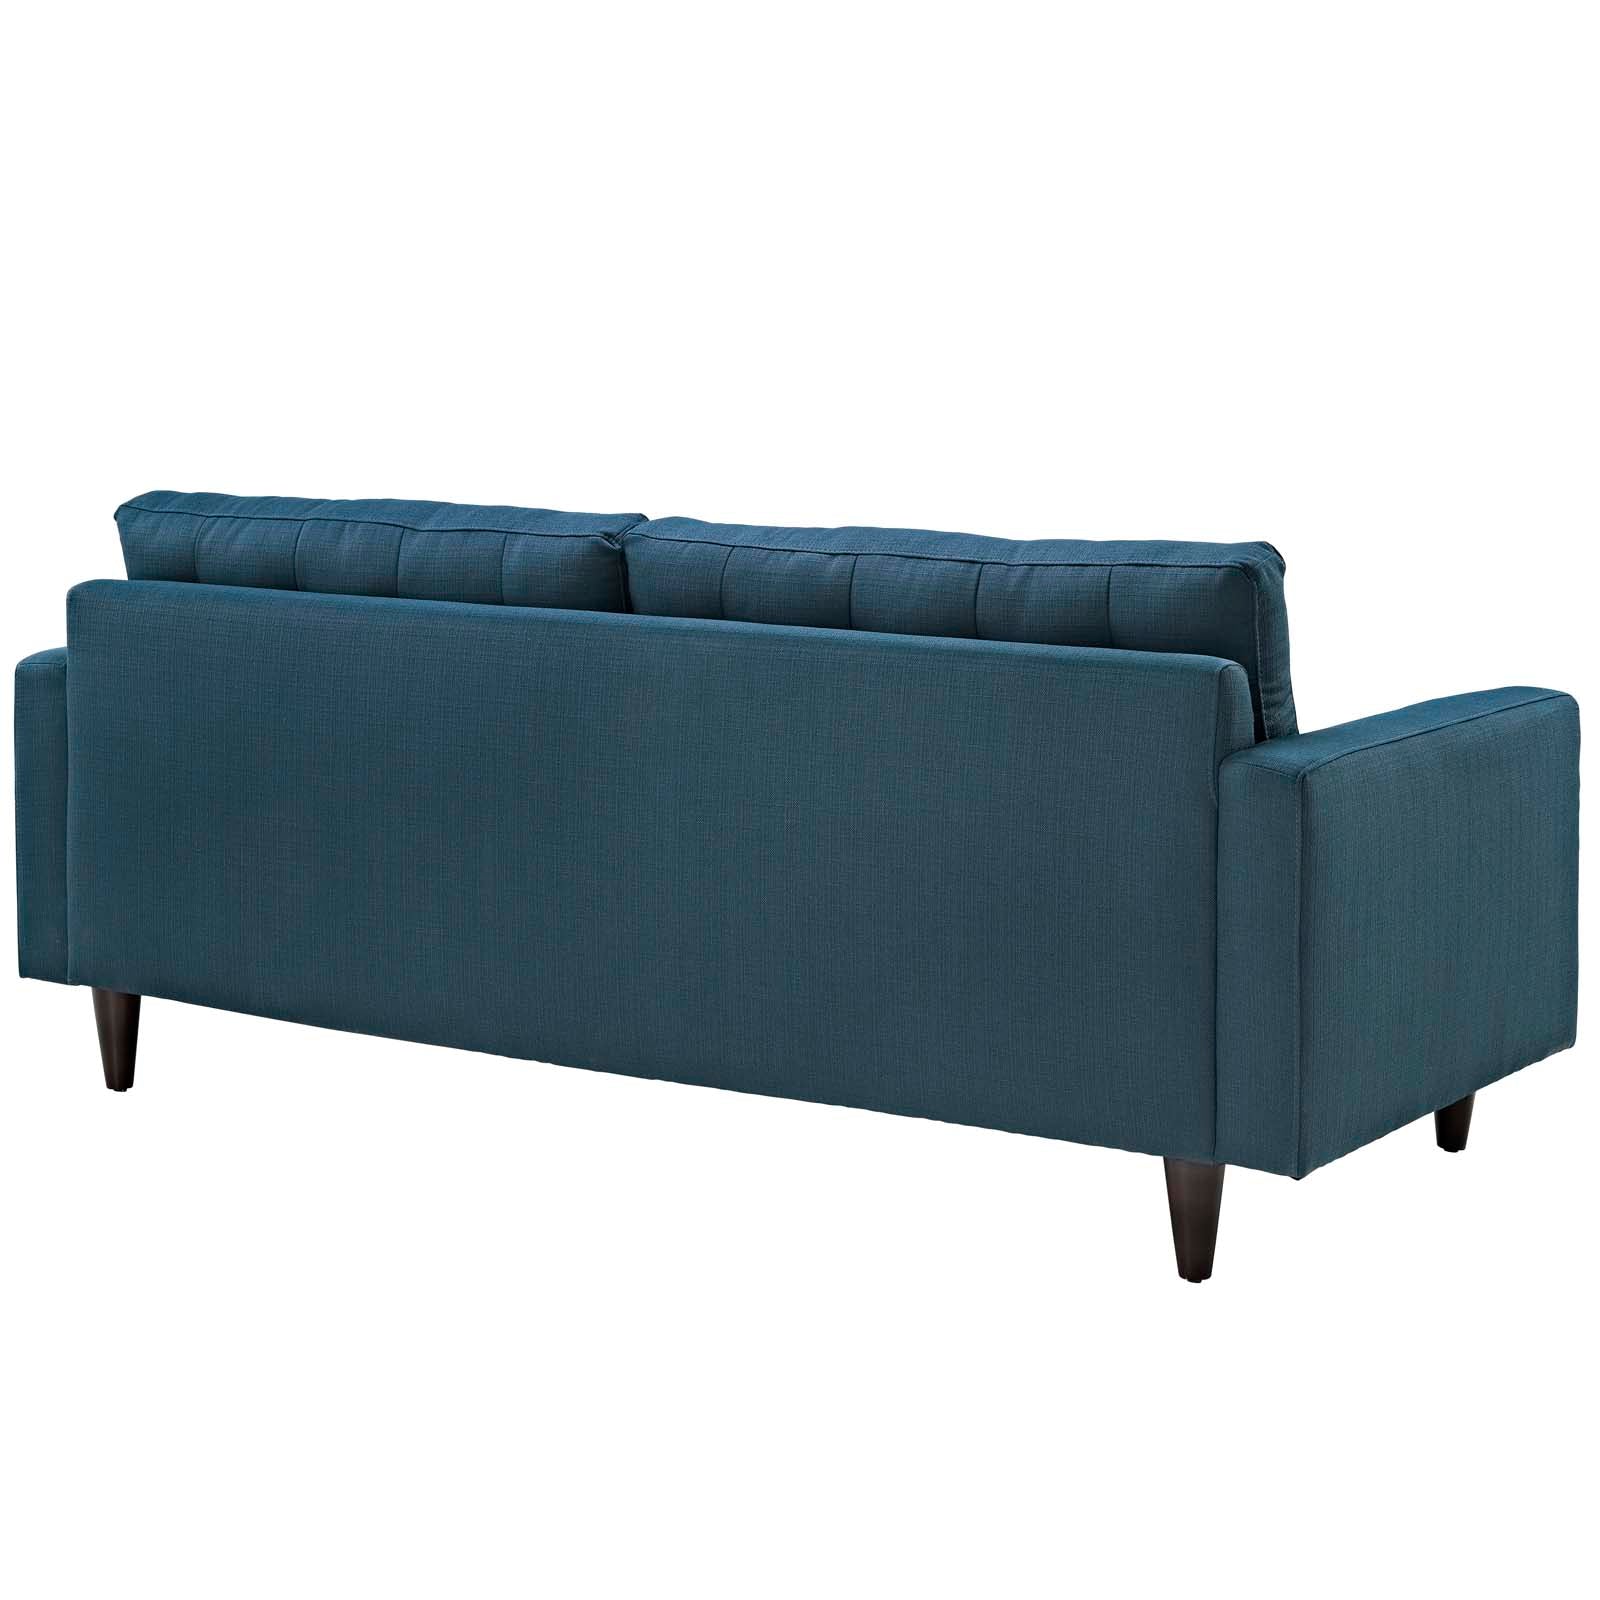 Modway Sofas & Couches - Empress Upholstered Fabric Sofa Azure